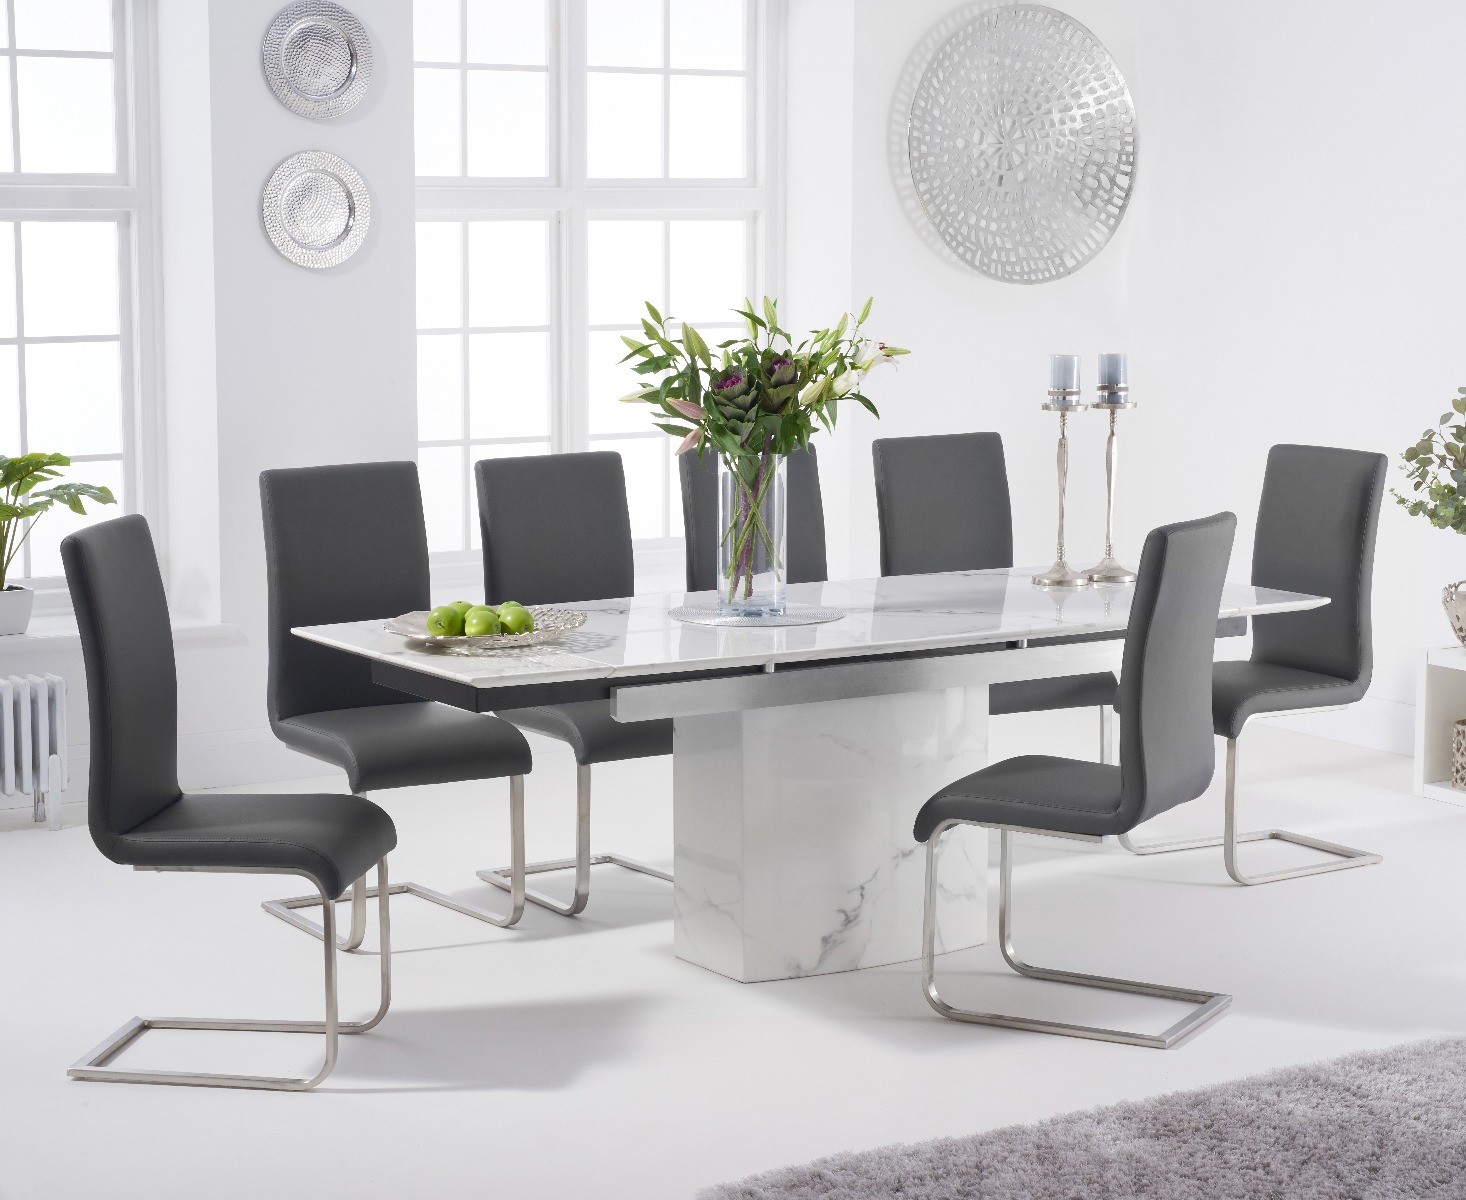 Extending Savona 160cm White Marble Dining Table With 4 Black Austin Chairs